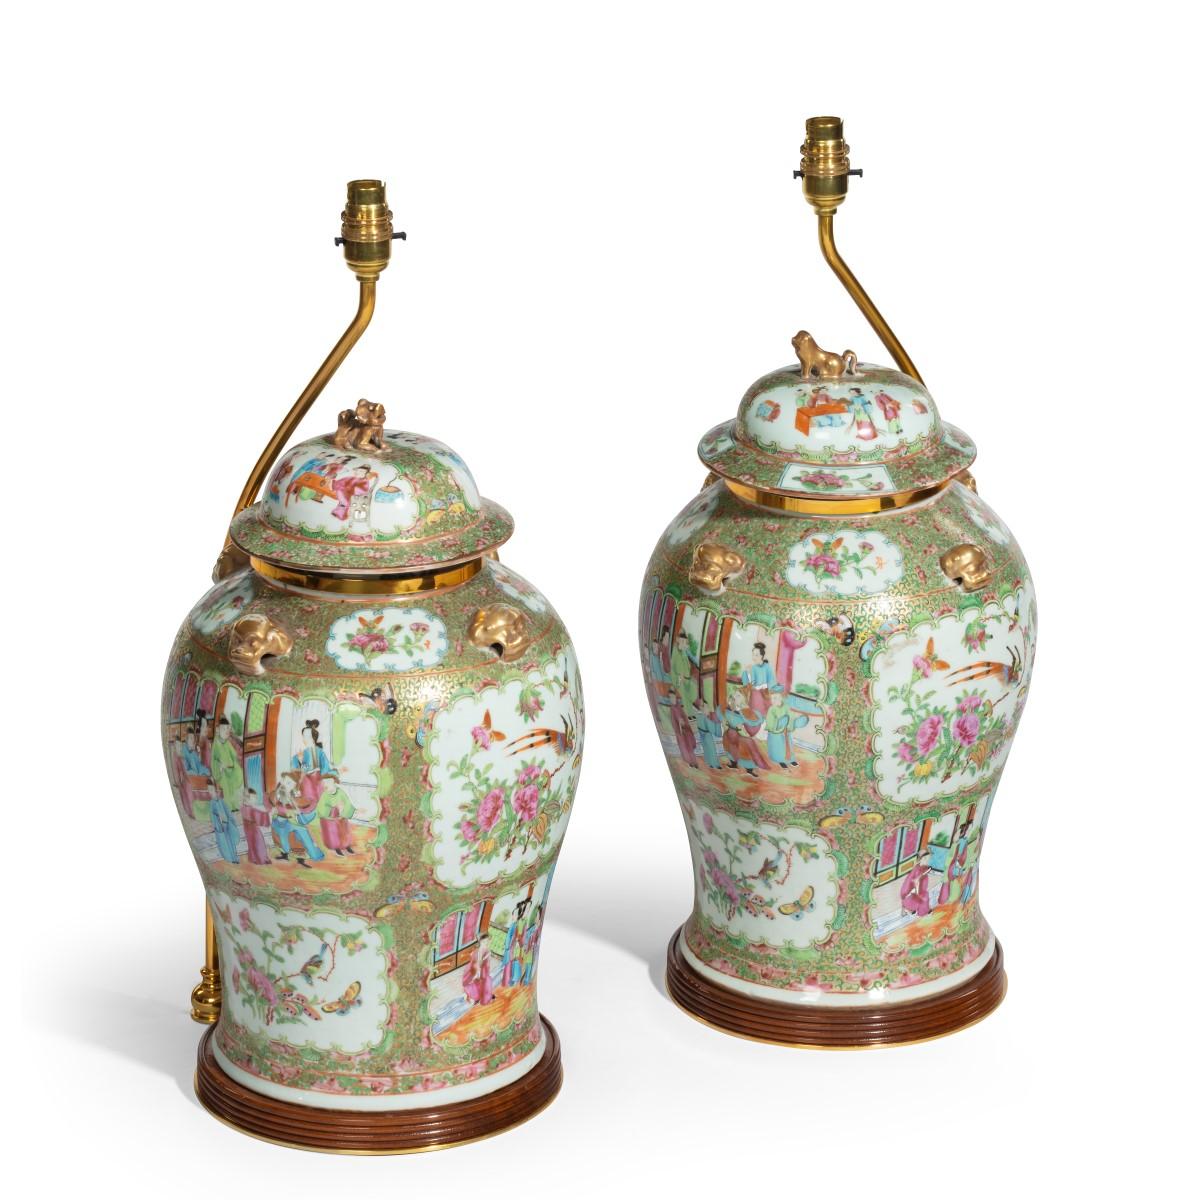 A pair of Chinese vases and covers, each of baluster form with a domed cover and a stylized gilt Fo-dog finial and handles, decorated in colored enamels and gilt with numerous panels showing courtly scenes, birds and butterflies amongst flowering